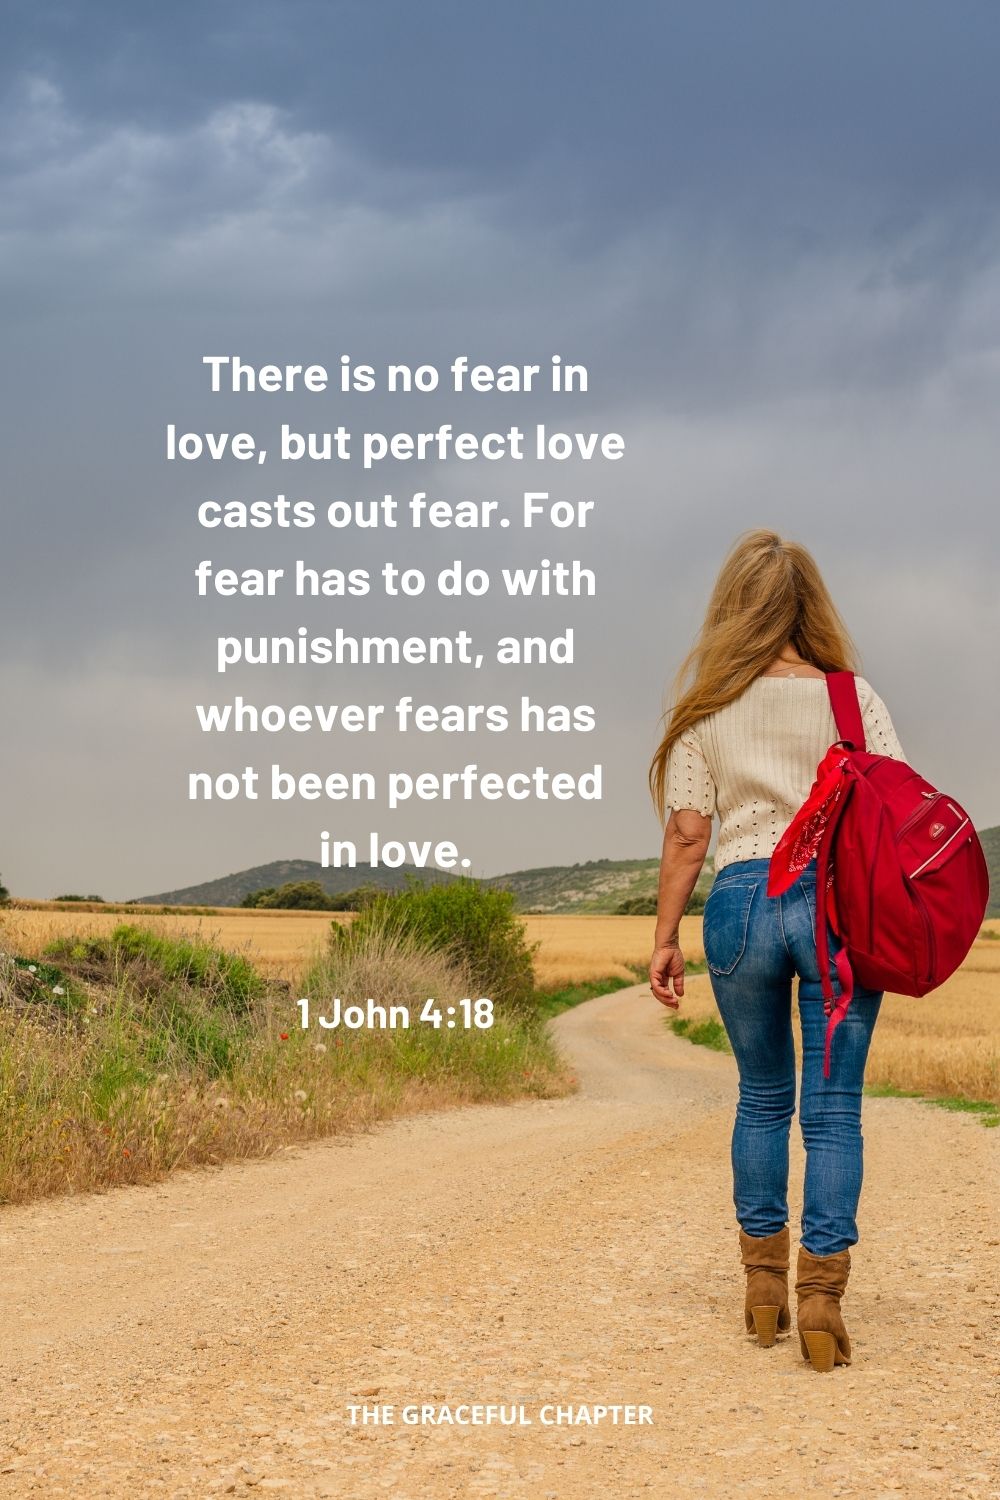 There is no fear in love, but perfect love casts out fear. For fear has to do with punishment, and whoever fears has not been perfected in love. 1 John 4:18 bible verses about confidence